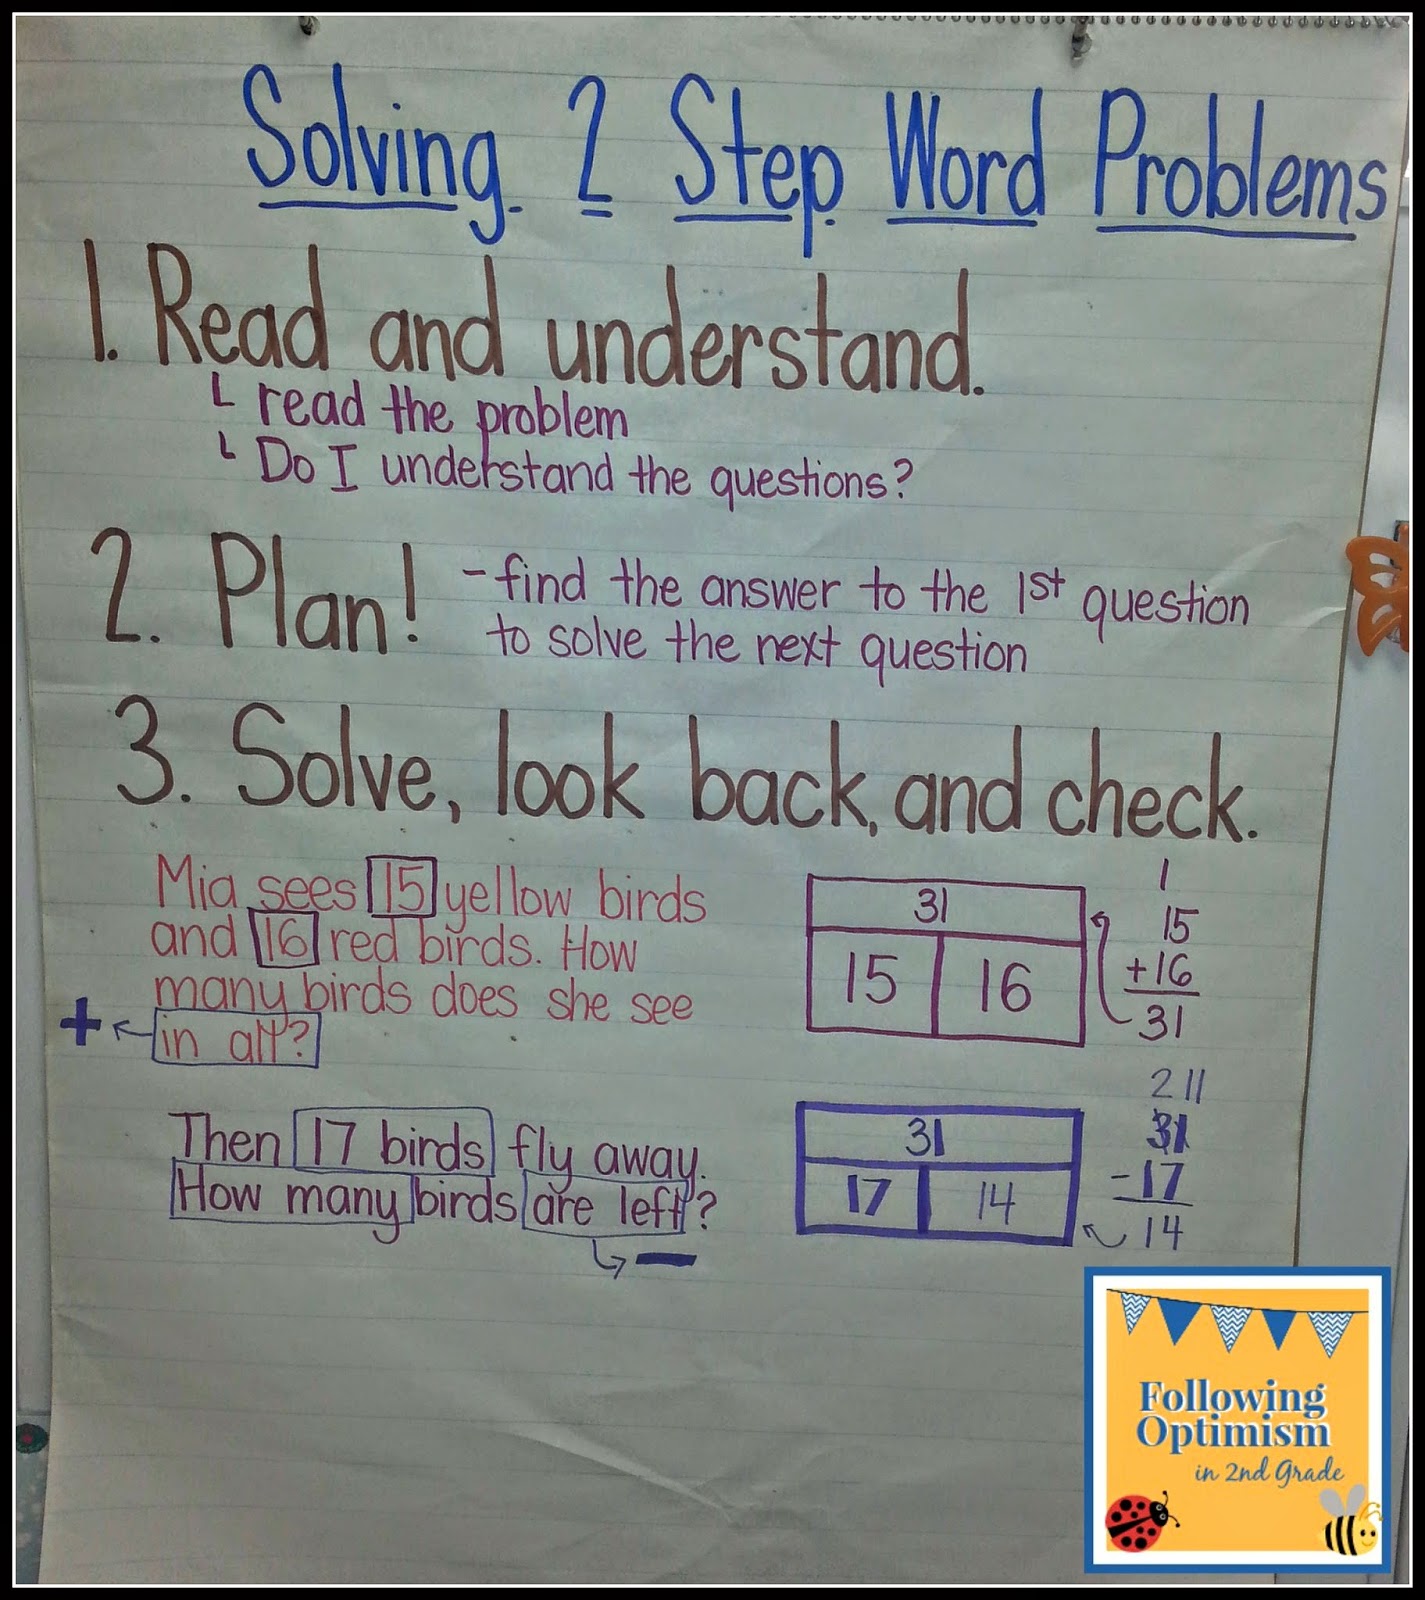 Following Optimism in 2nd Grade: Two Step Word Problems